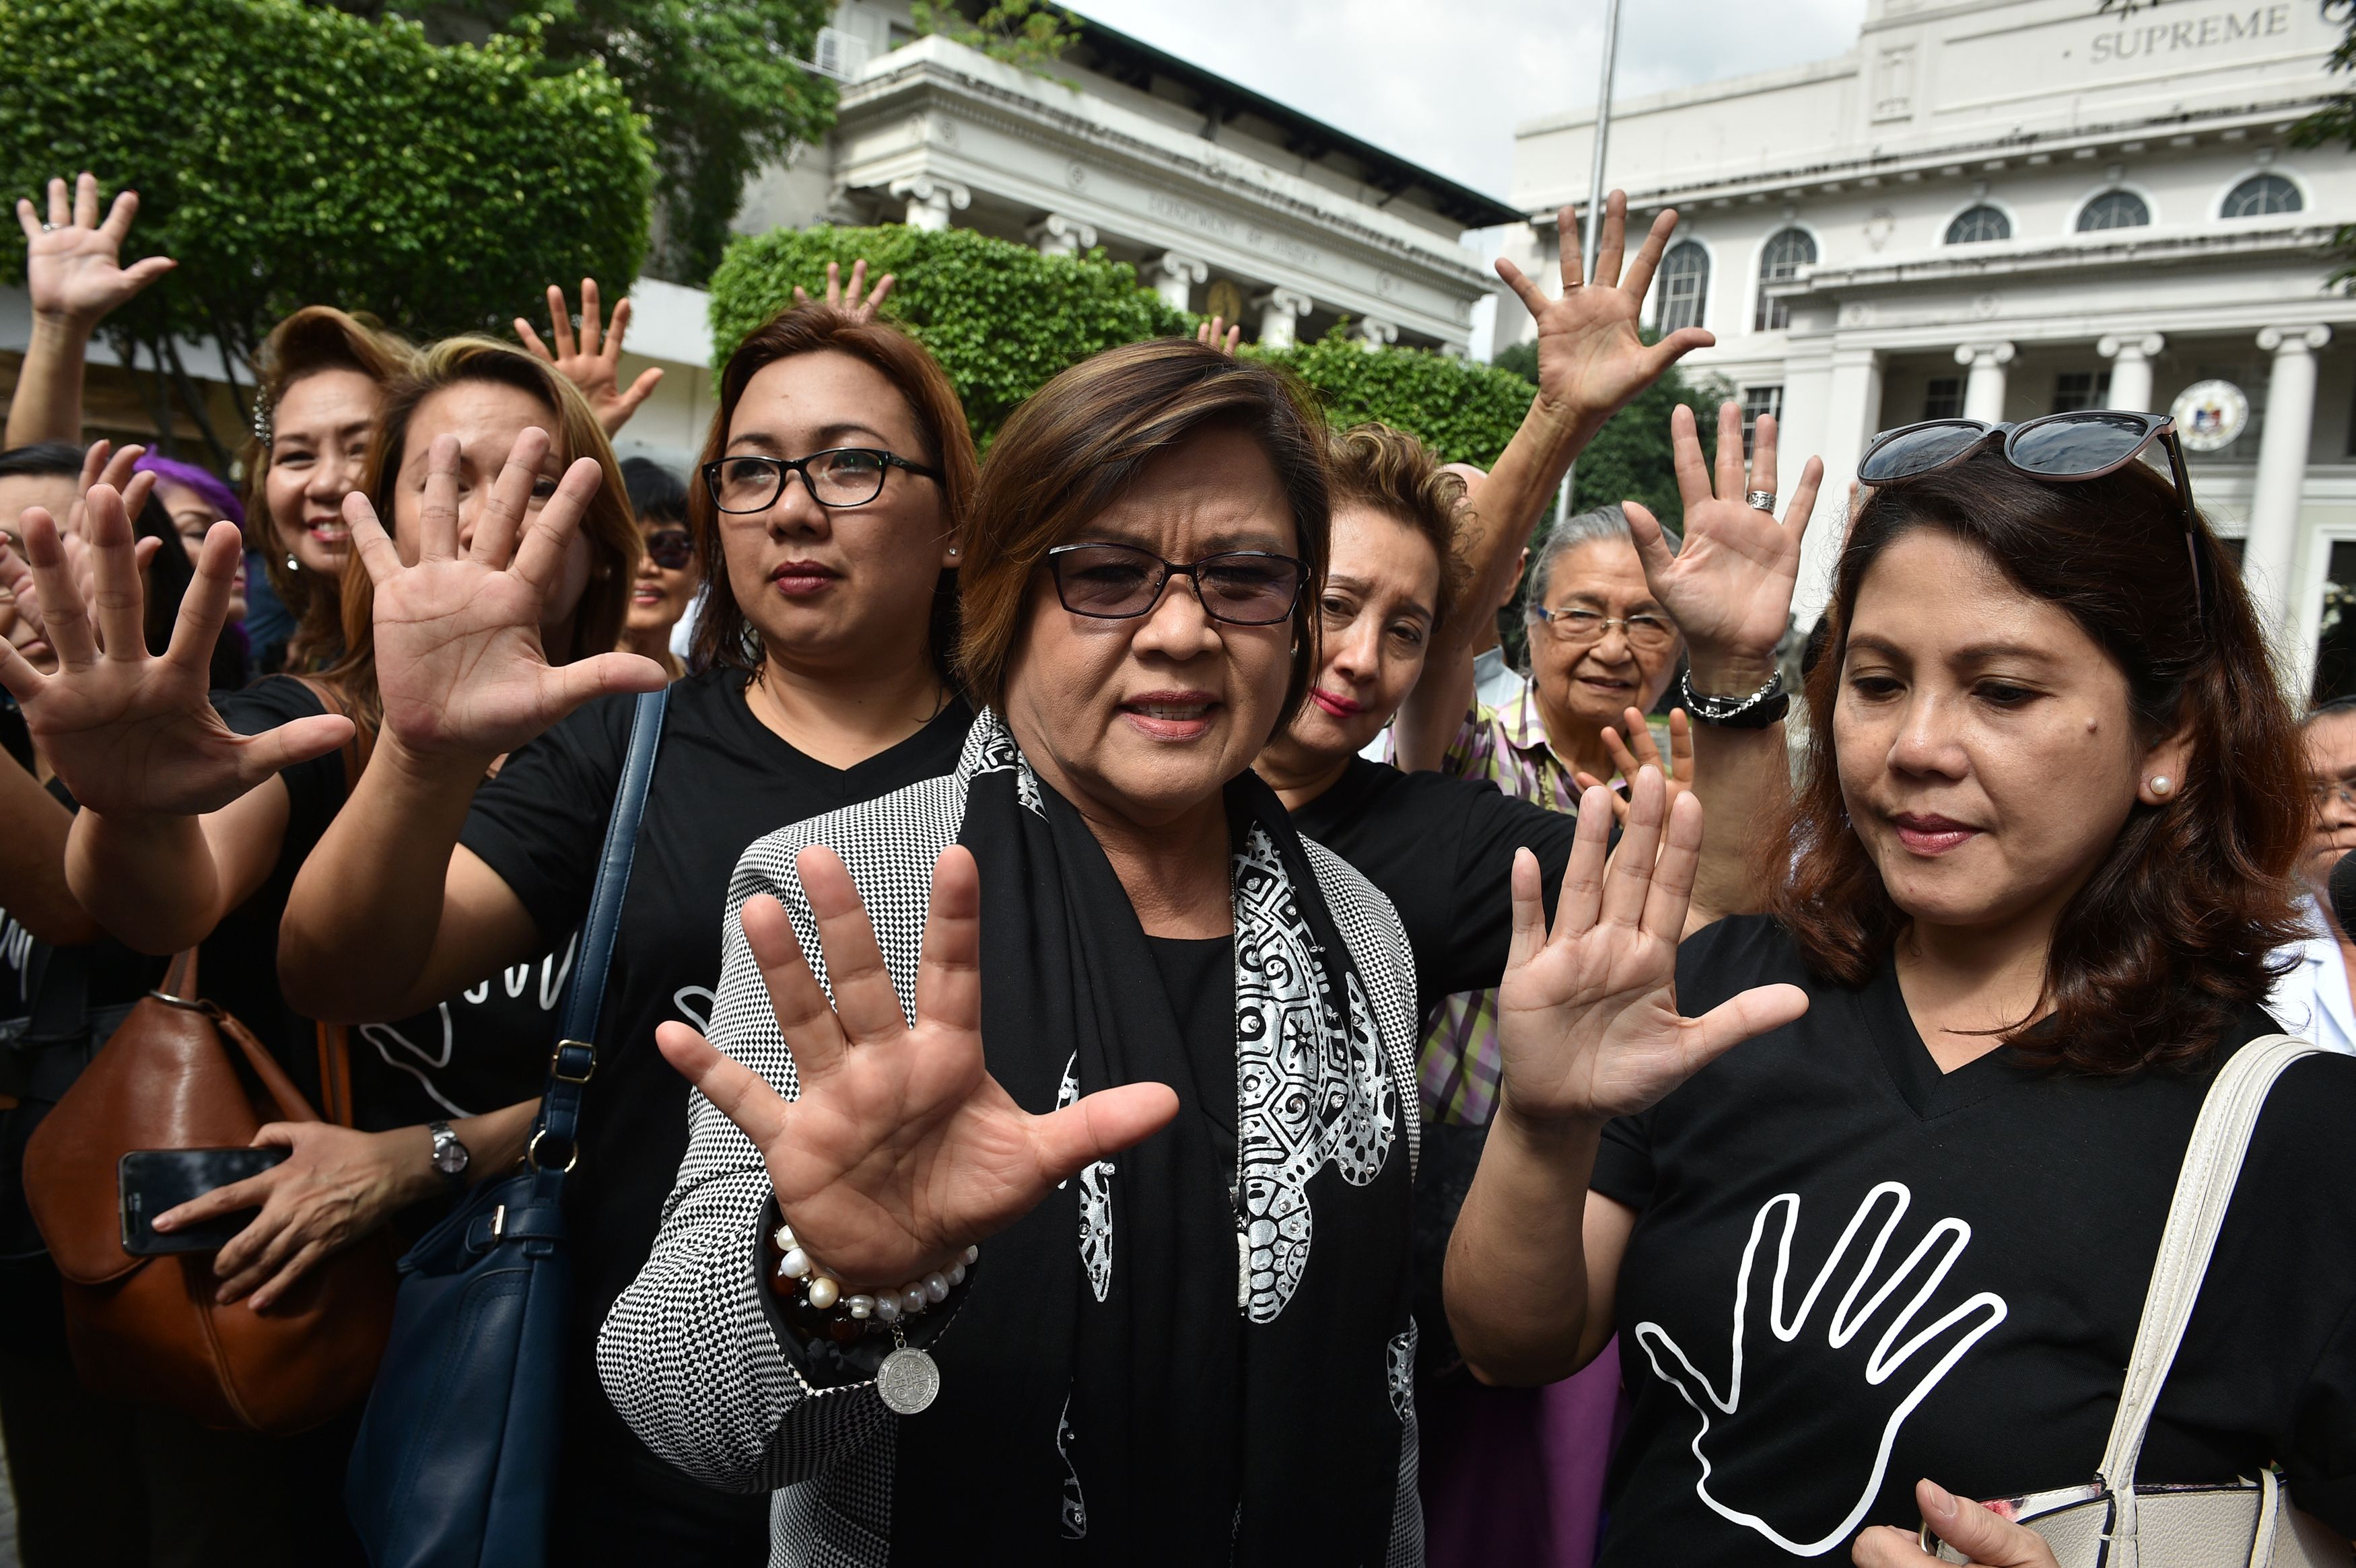 Senator Leila de Lima, center, gestures with supporters after filing her petition for habeas data against Philippine President Rodrigo Duterte at the Supreme Court in Manila on Nov. 7, 2016. De Lima, former Justice Secretary who is a leading critic of Duterte's war on drugs, launched a Senate probe into the surge of killings since Duterte took office on June 30, which led to her being ousted on Sept. 19 by pro-Duterte Senators as head of the Senate justice committee. (Ted Aljibe—AFP/Getty Images)